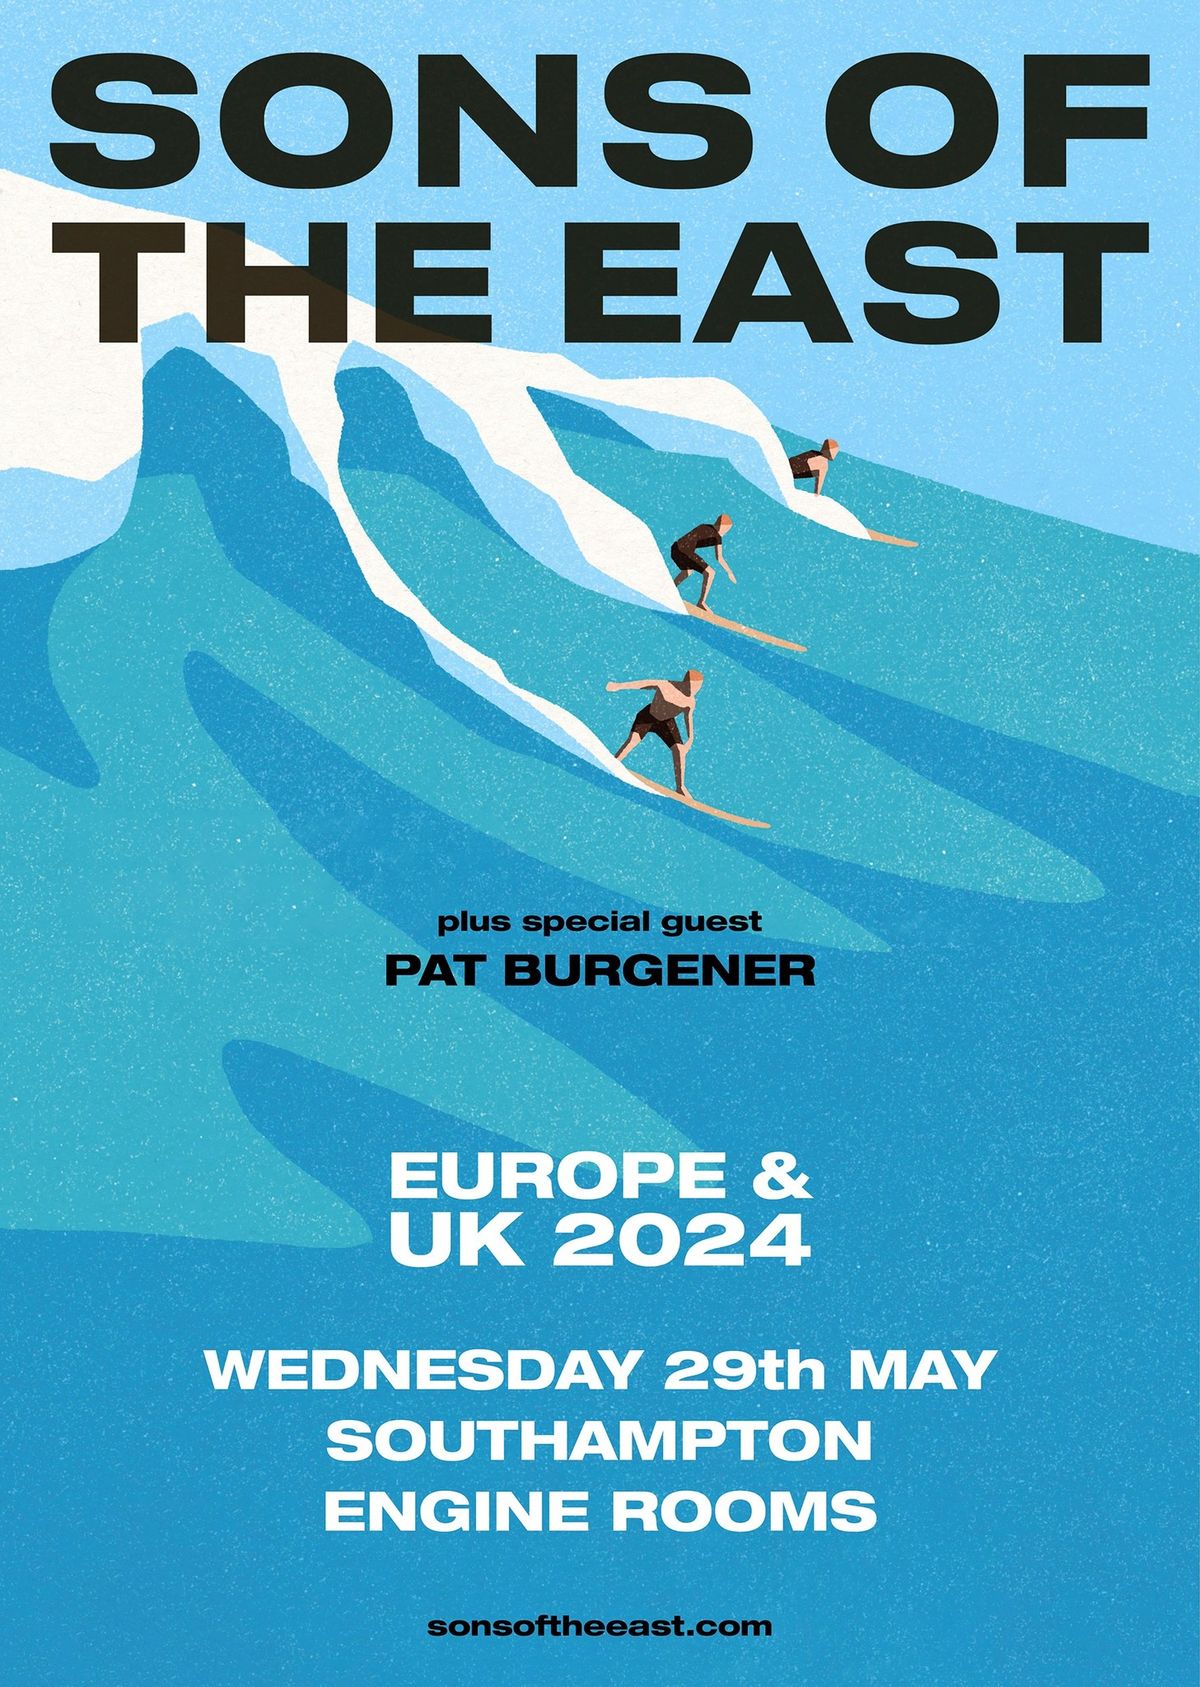 Sons of The East + Pat Burgener at Engine Rooms, Southampton